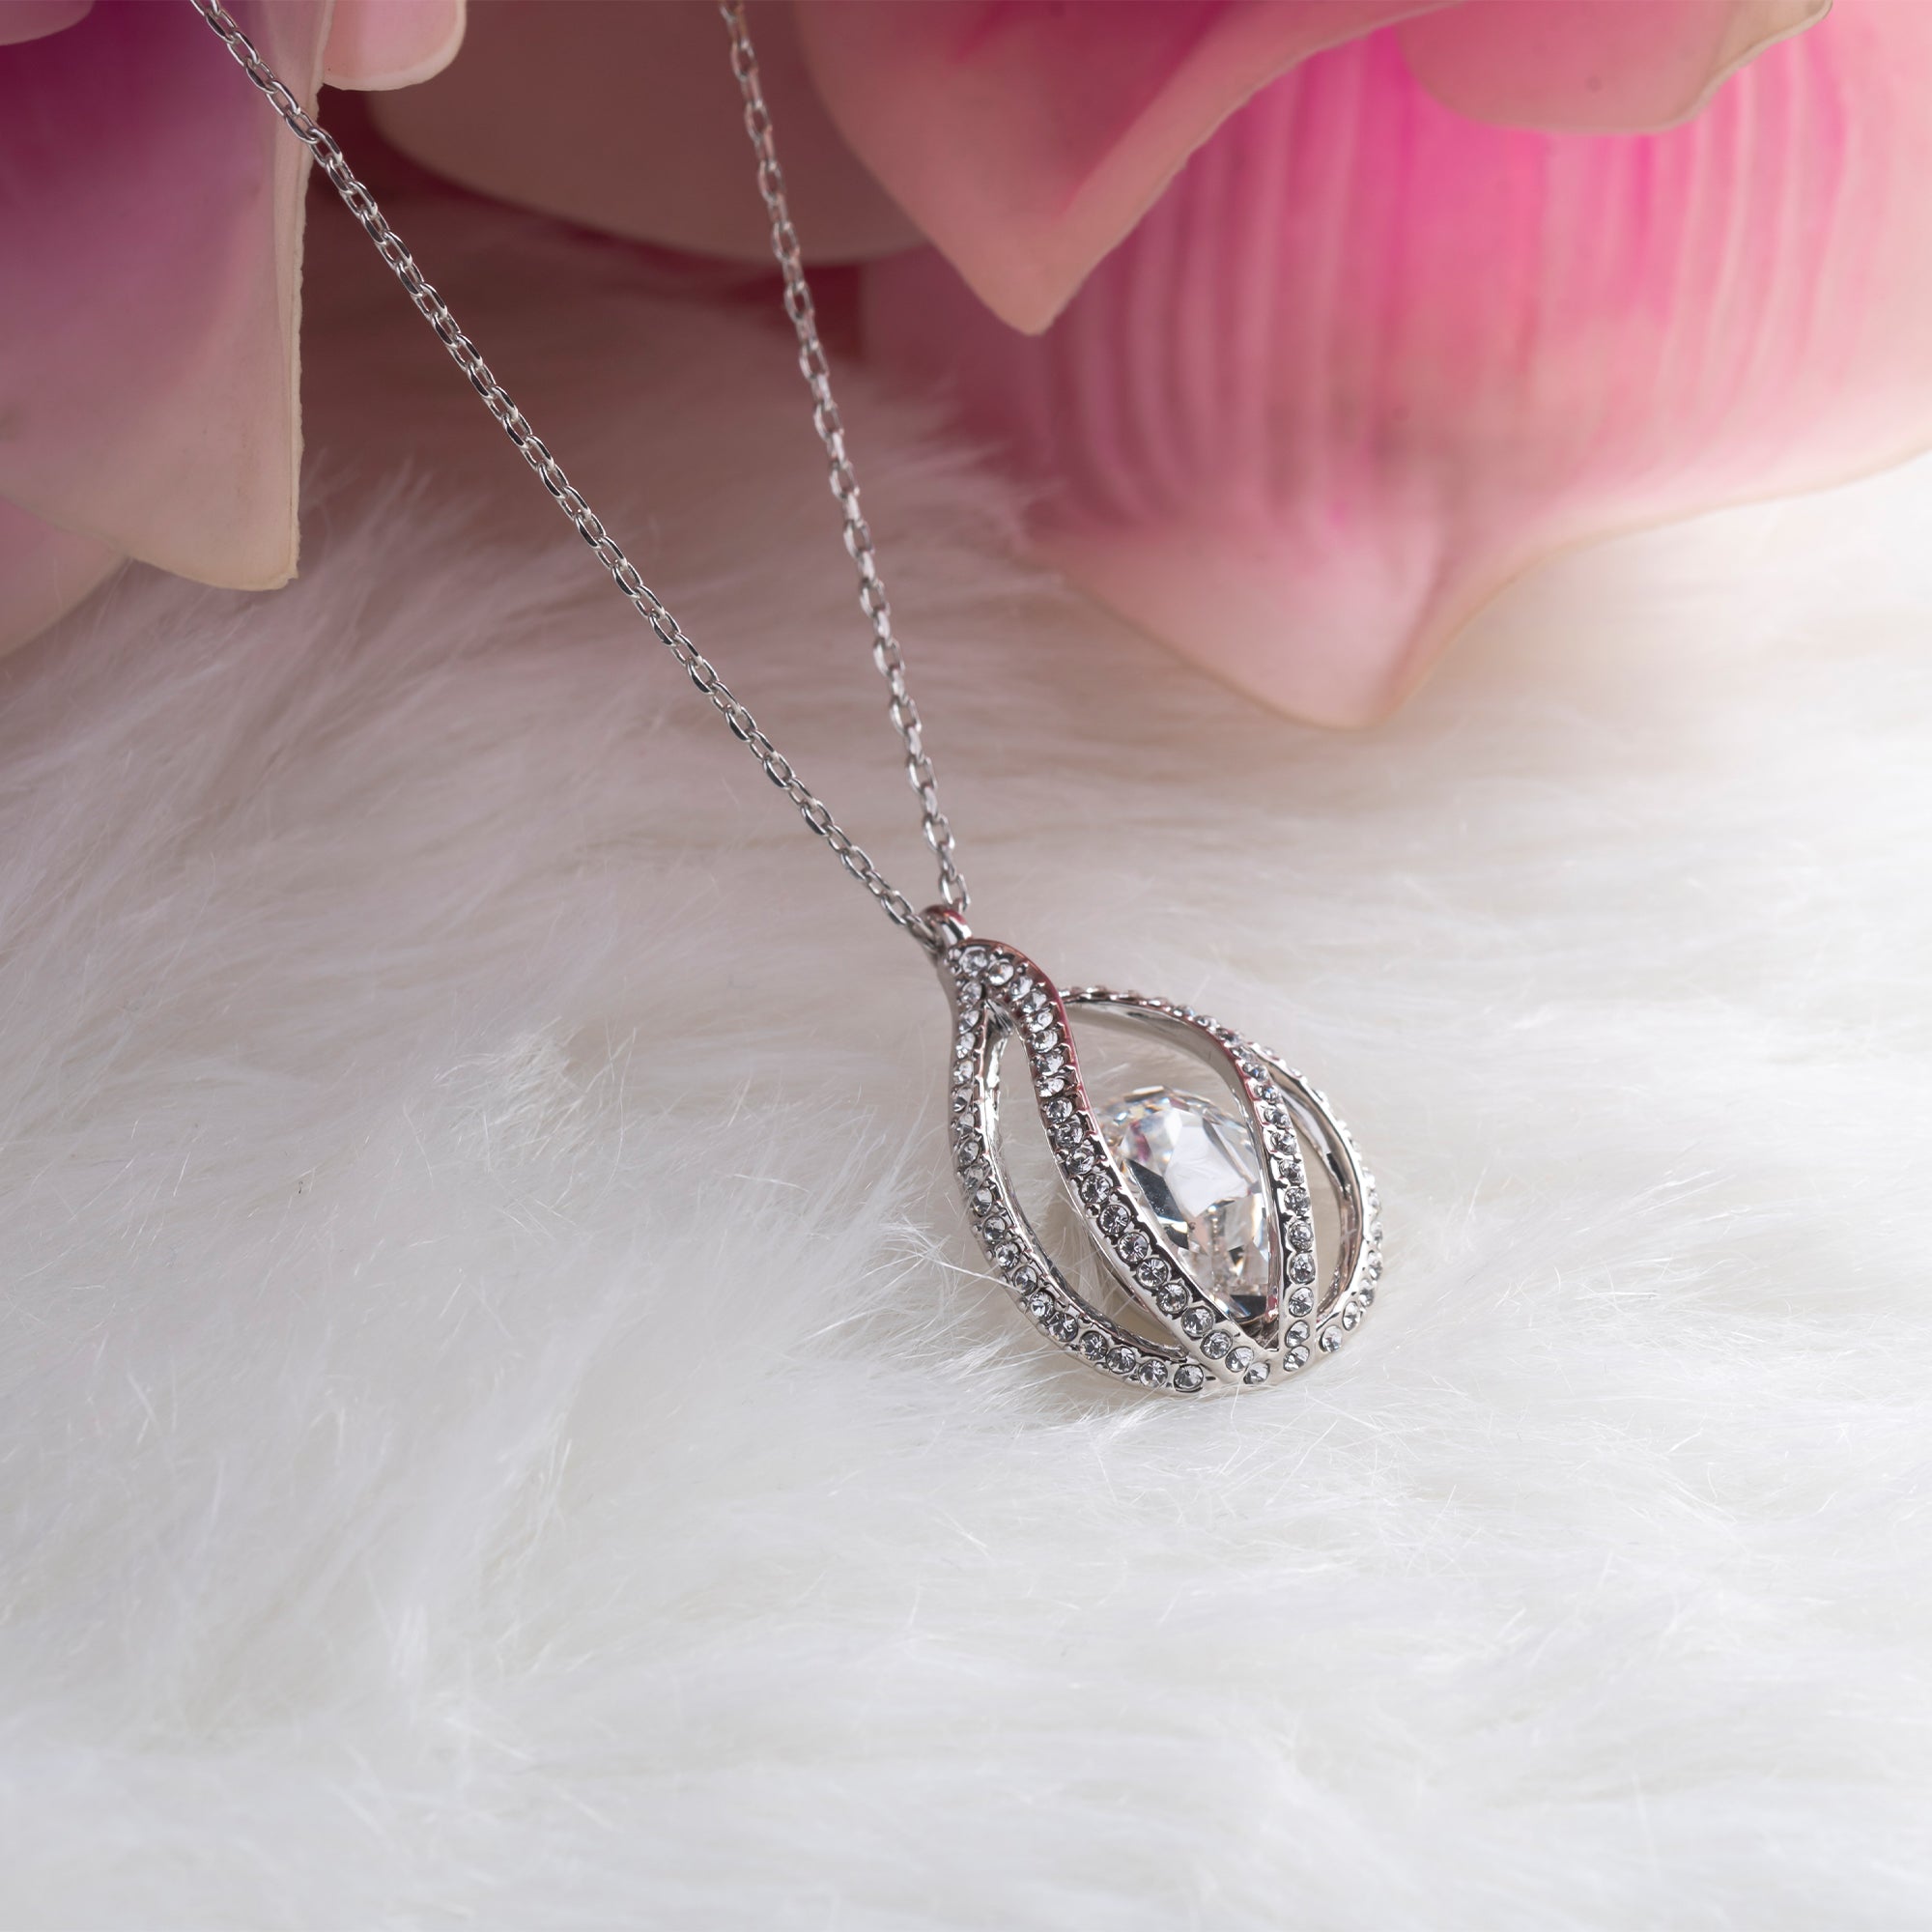 To The Mother of The Bride- Orbital Birdcage Necklace